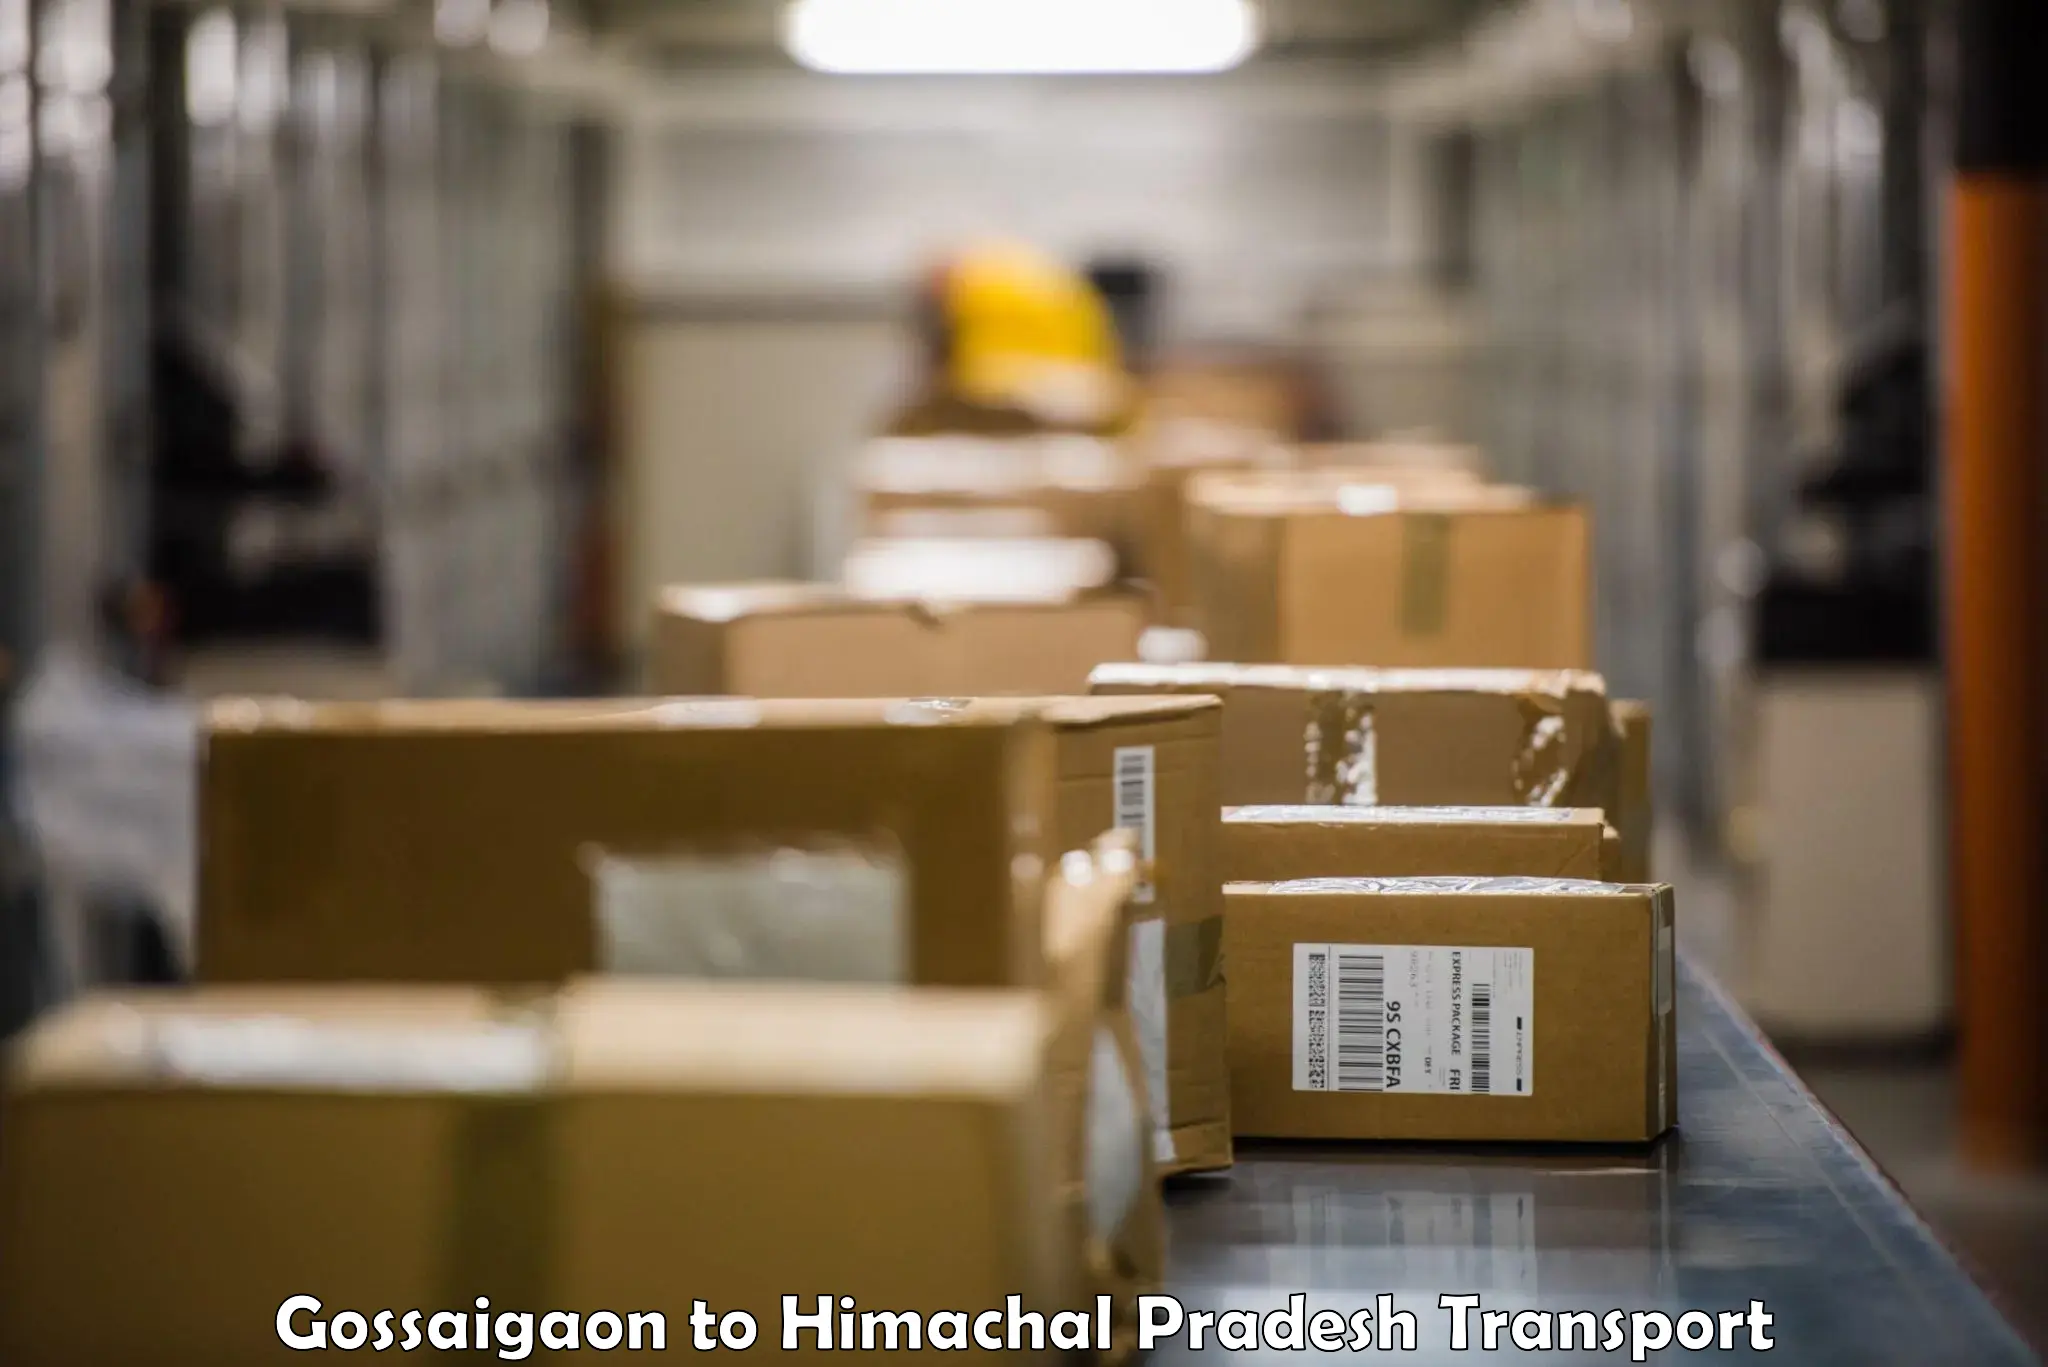 Truck transport companies in India Gossaigaon to Palion